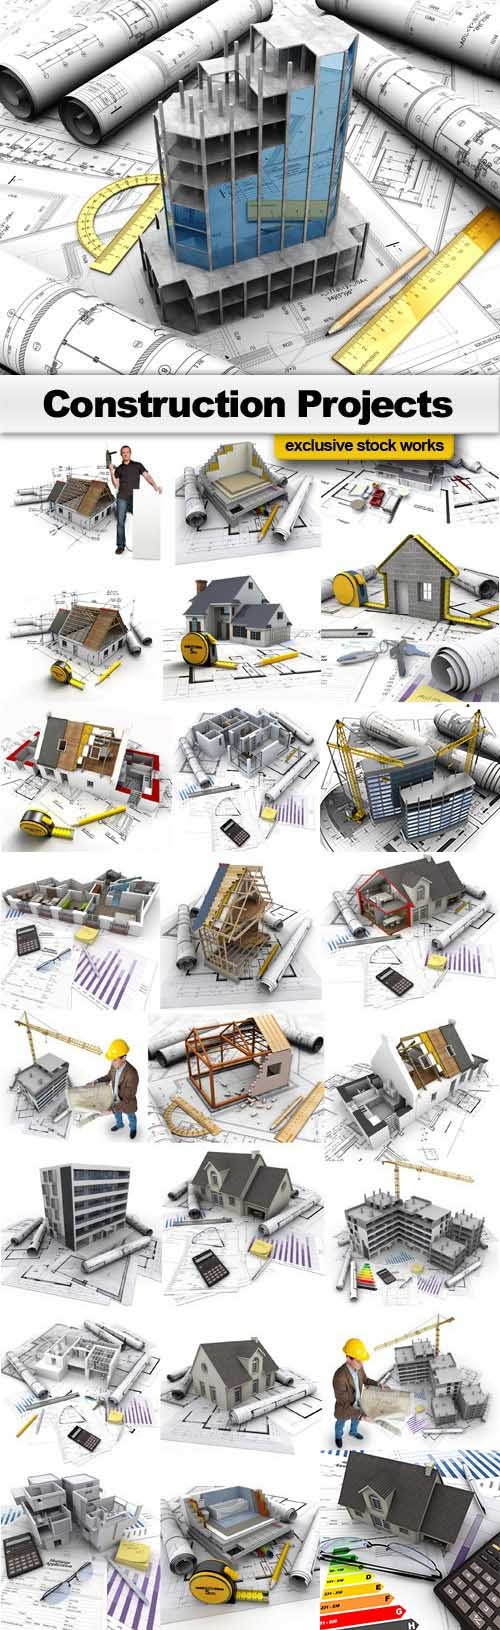 Construction Projects & Technical Drawings 25xJPG